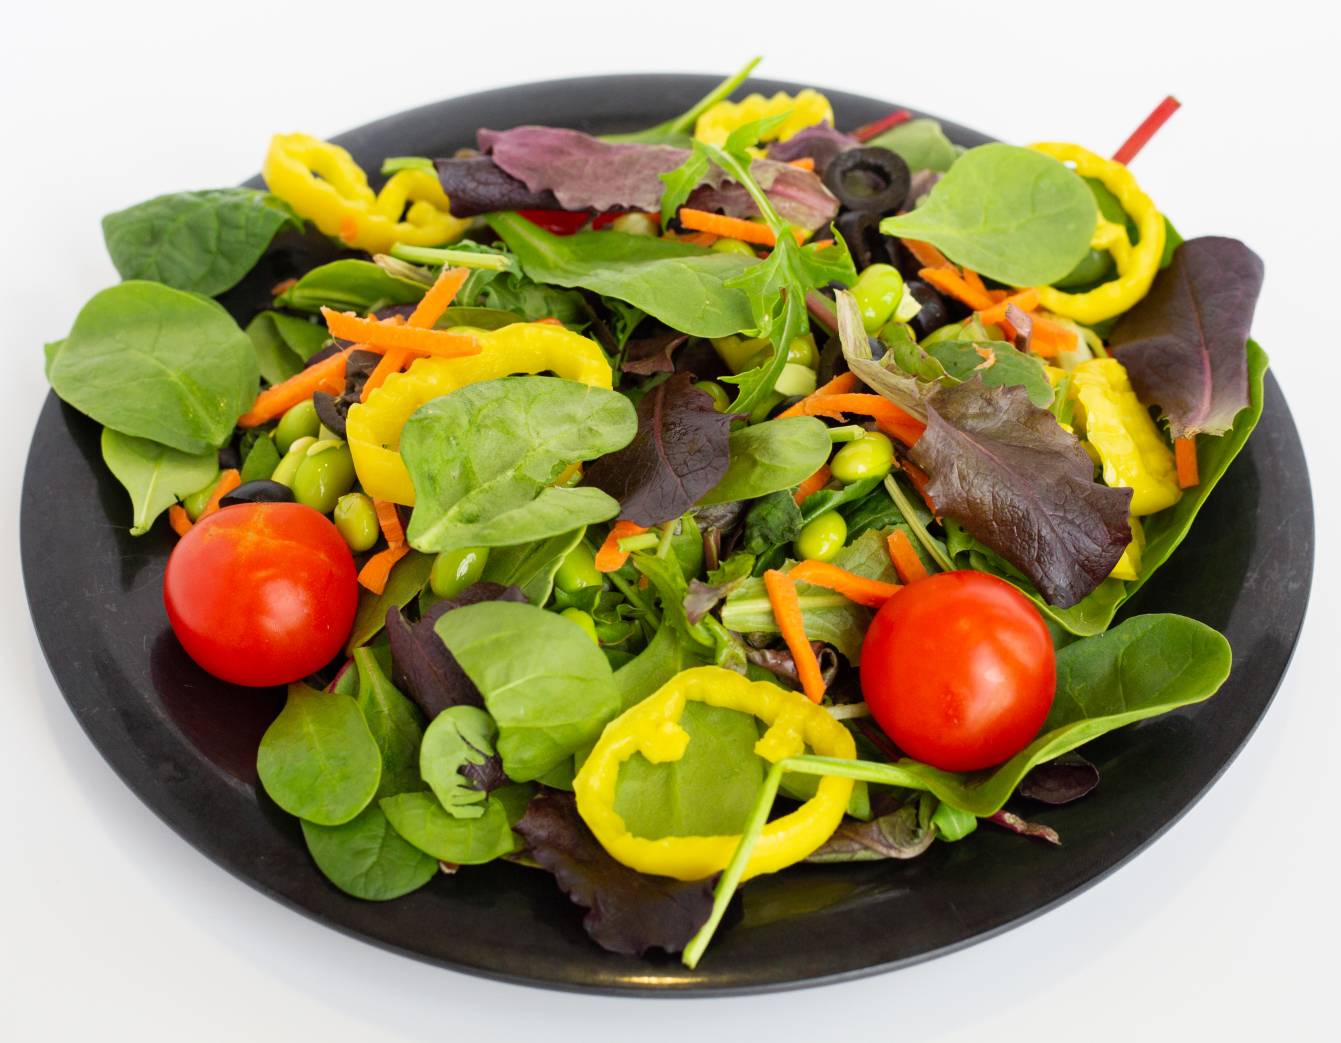 A photograph of a bowl of salad with spinach, cherry tomatoes, carrots, and banana peppers.